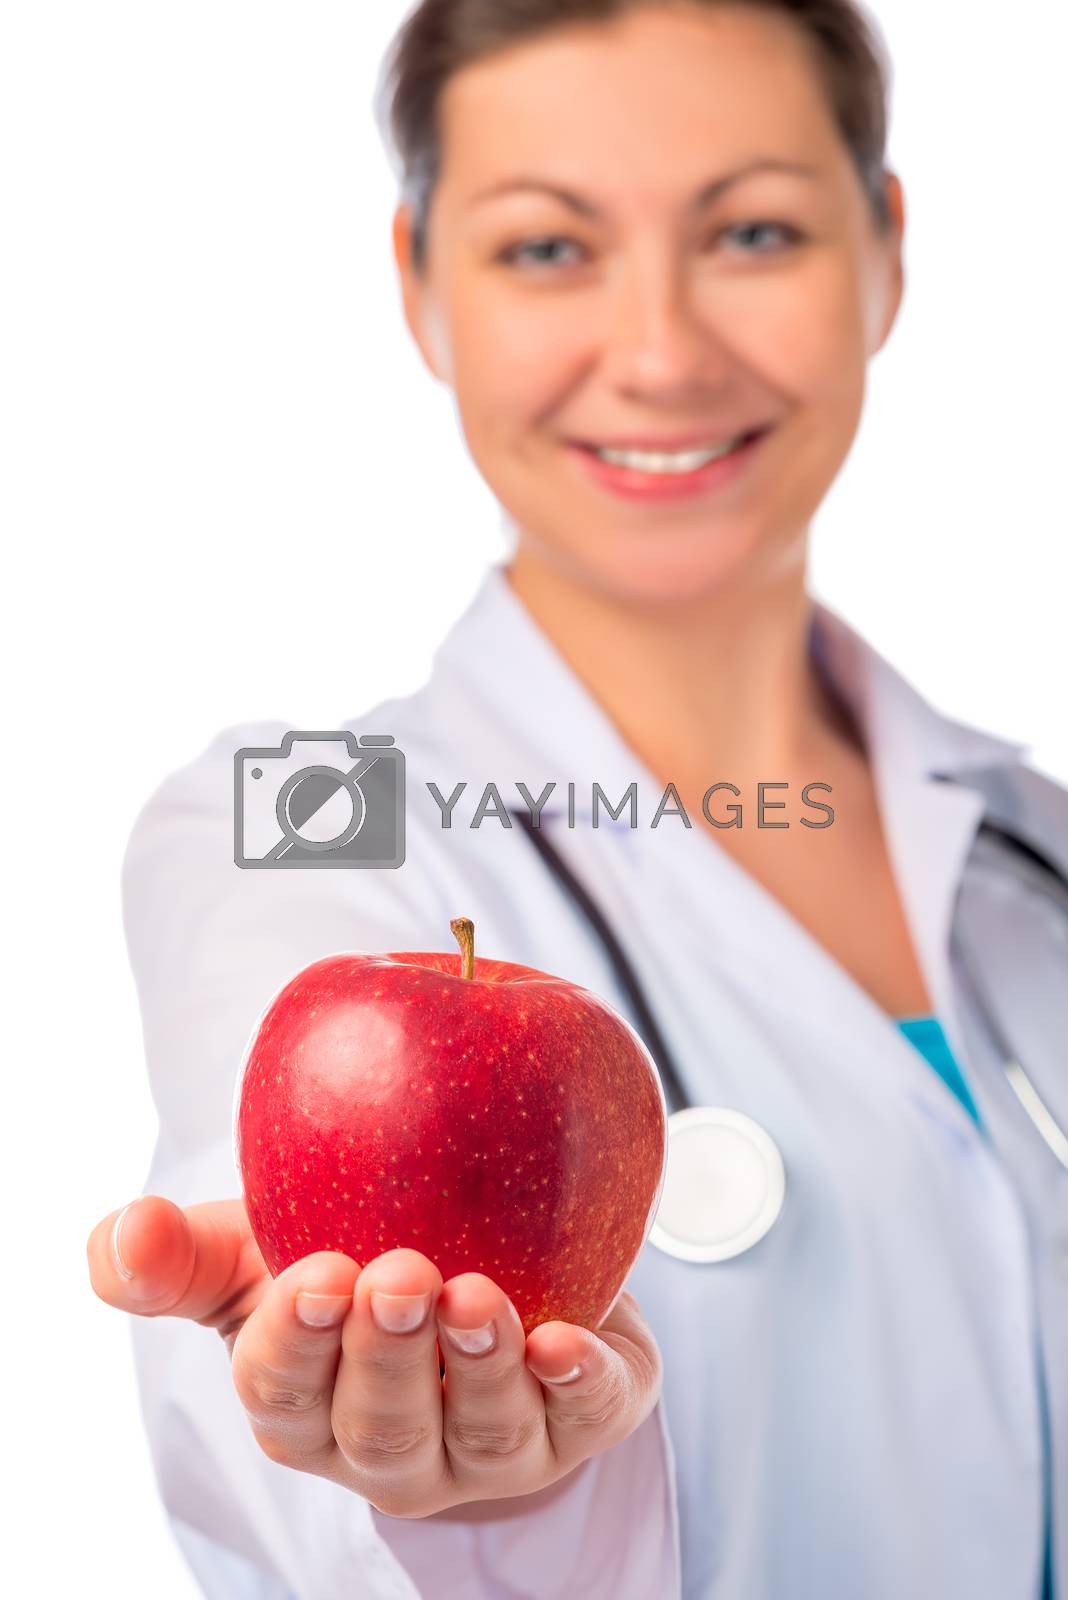 Royalty free image of Smiling doctor holding a red apple in the palm by kosmsos111